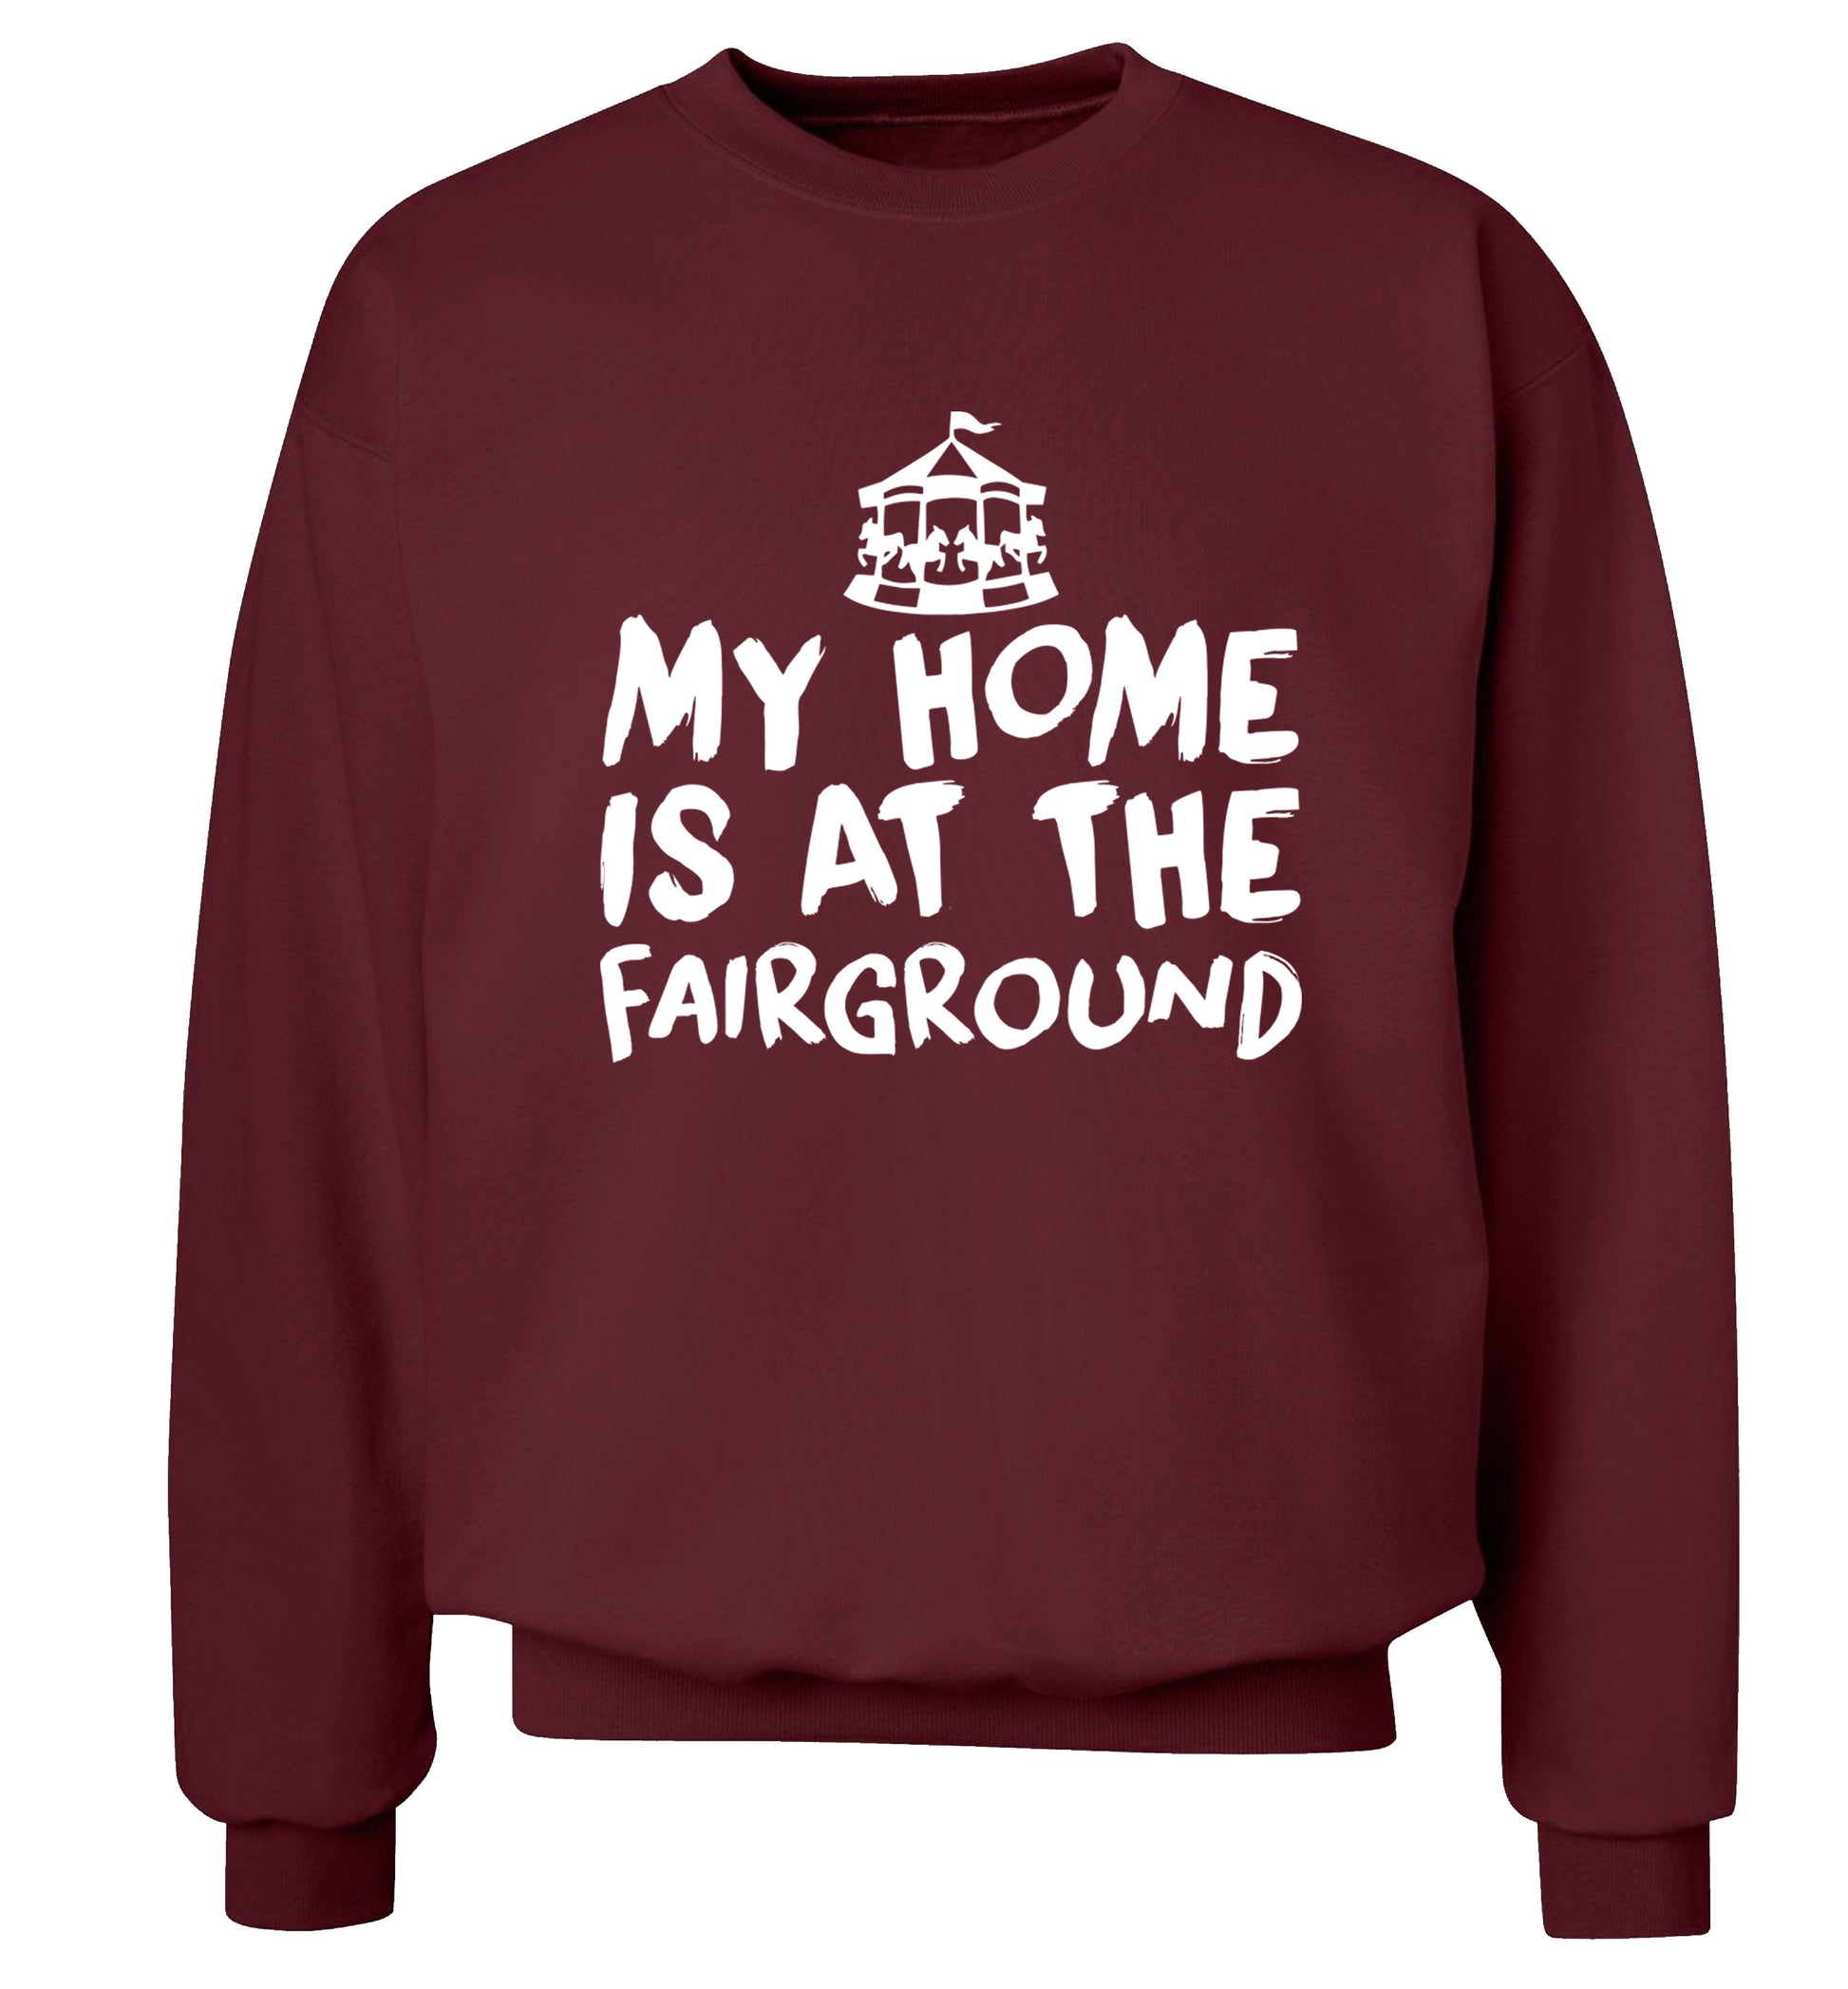 My home is at the fairground Adult's unisex maroon Sweater 2XL